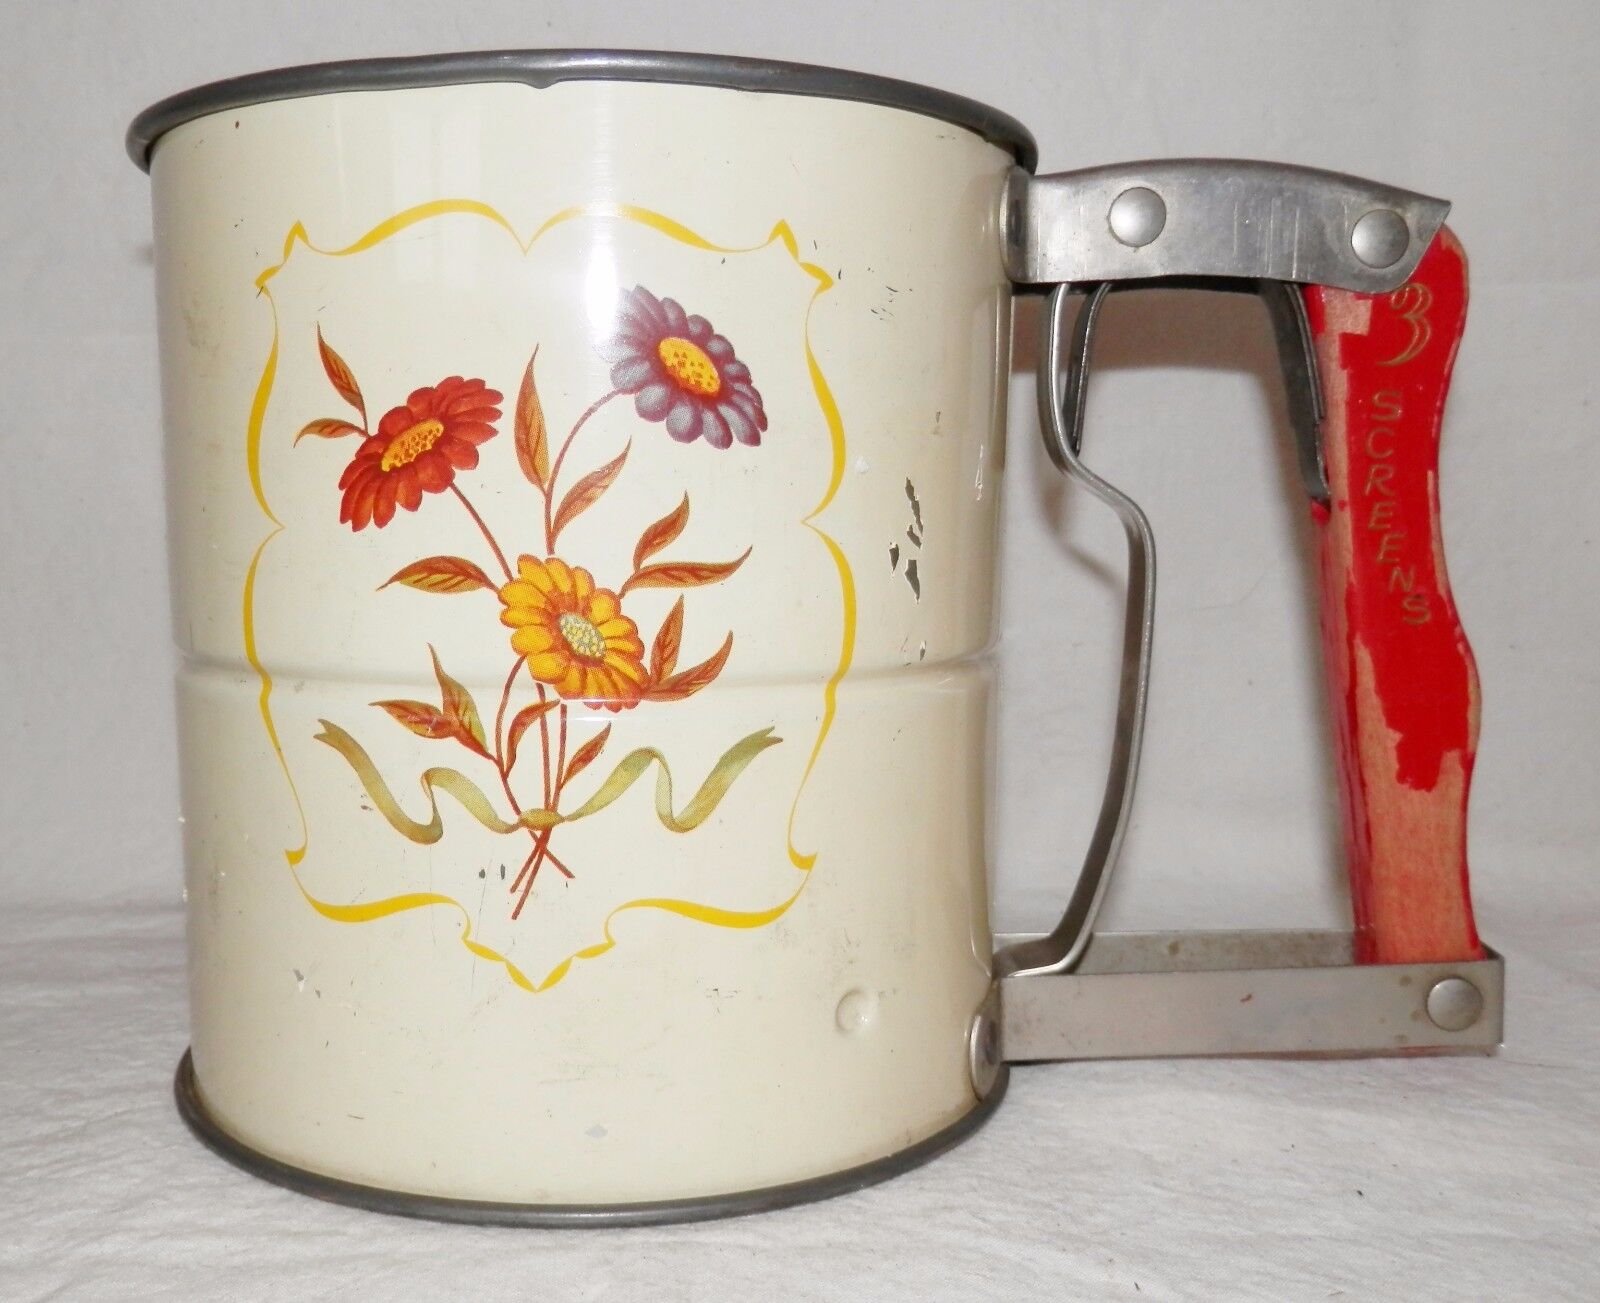 Vintage Sifter Floral Transfer 3 Screen Wood Handle Hand-i-sift Androck Yellow